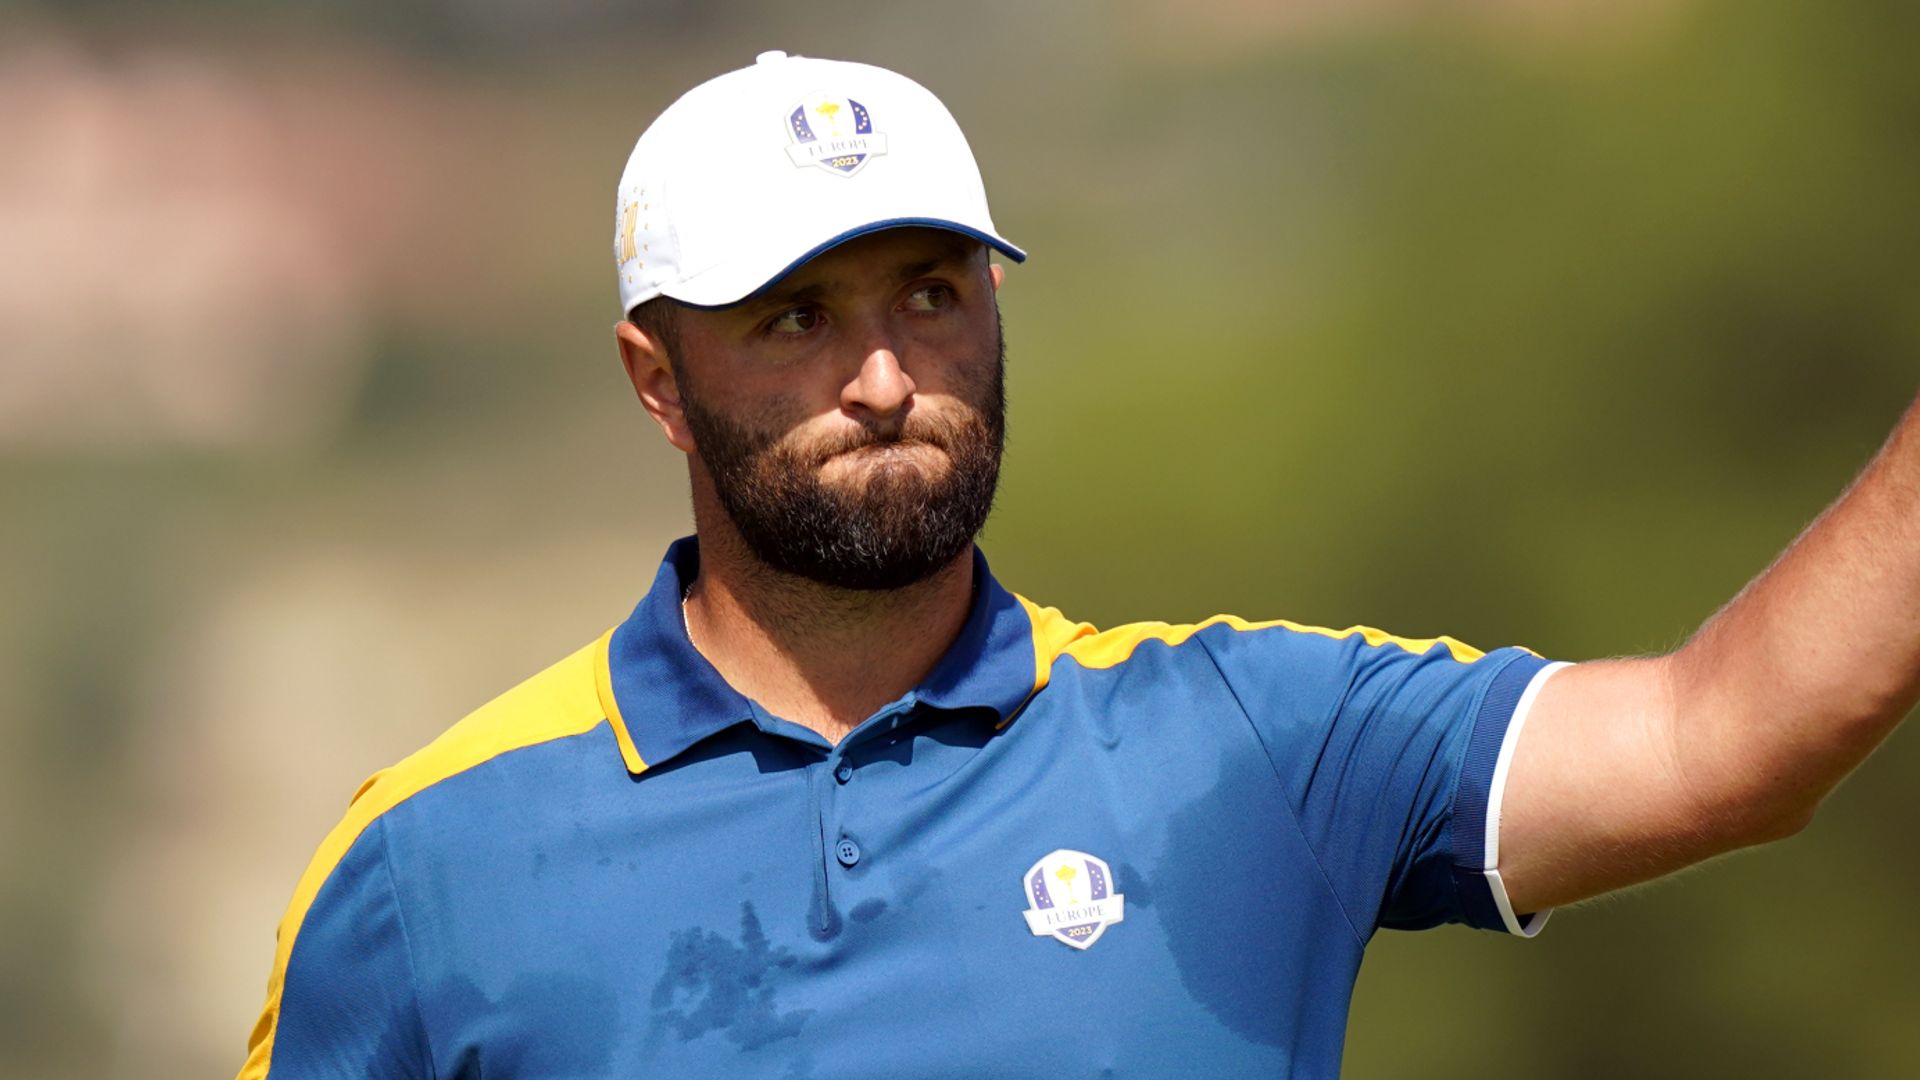 Ryder Cup LIVE! Can fired-up USA make history after fourballs drama?